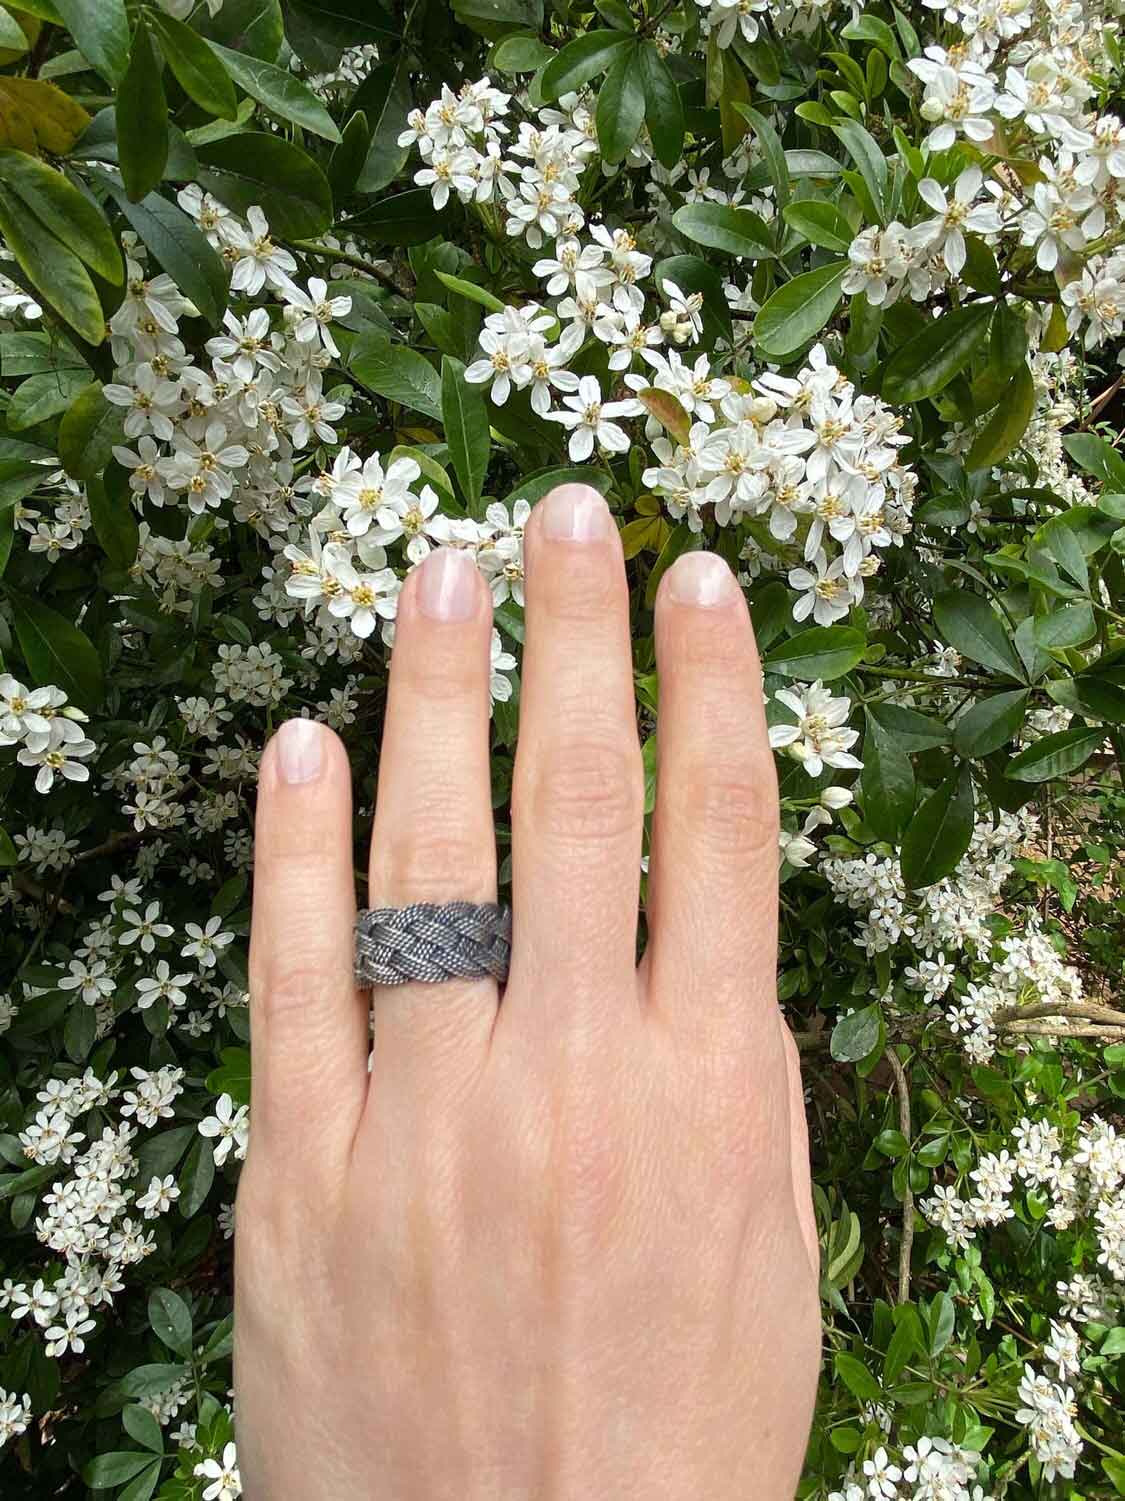 LOVE RING, Exceptional Quality, Sterling Silver Weaved Handmade Ring, Braided Ring, Weave Ring, Handmade Ring, Unisex Ring, Silver Ring